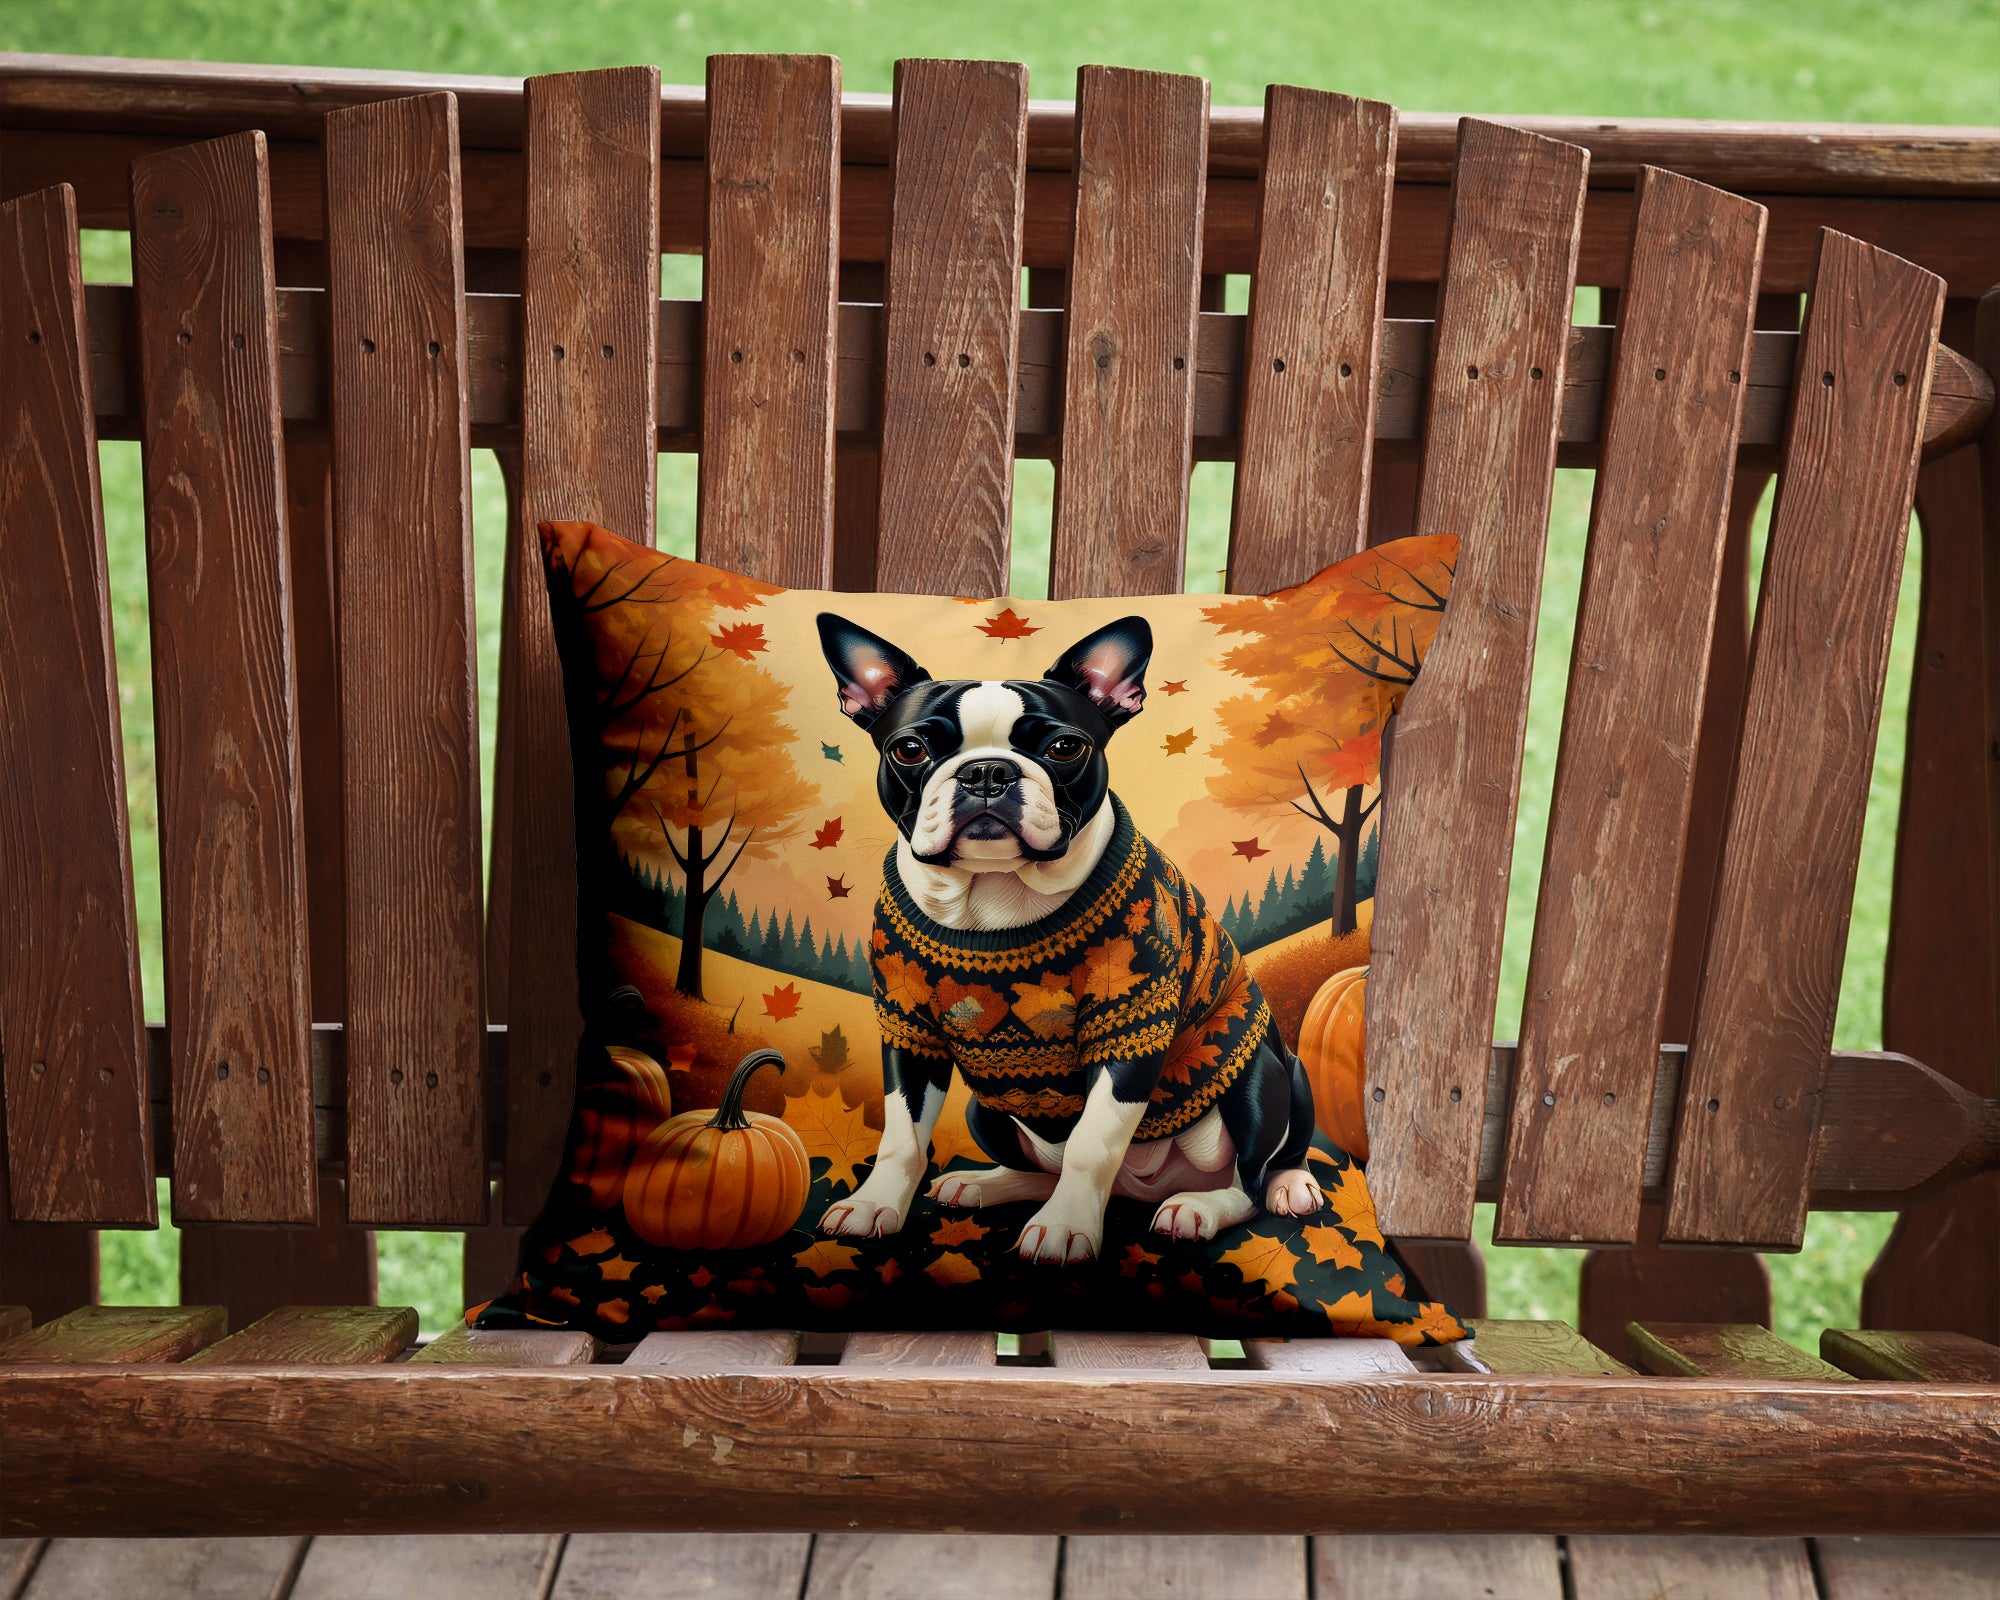 Buy this Boston Terrier Fall Fabric Decorative Pillow